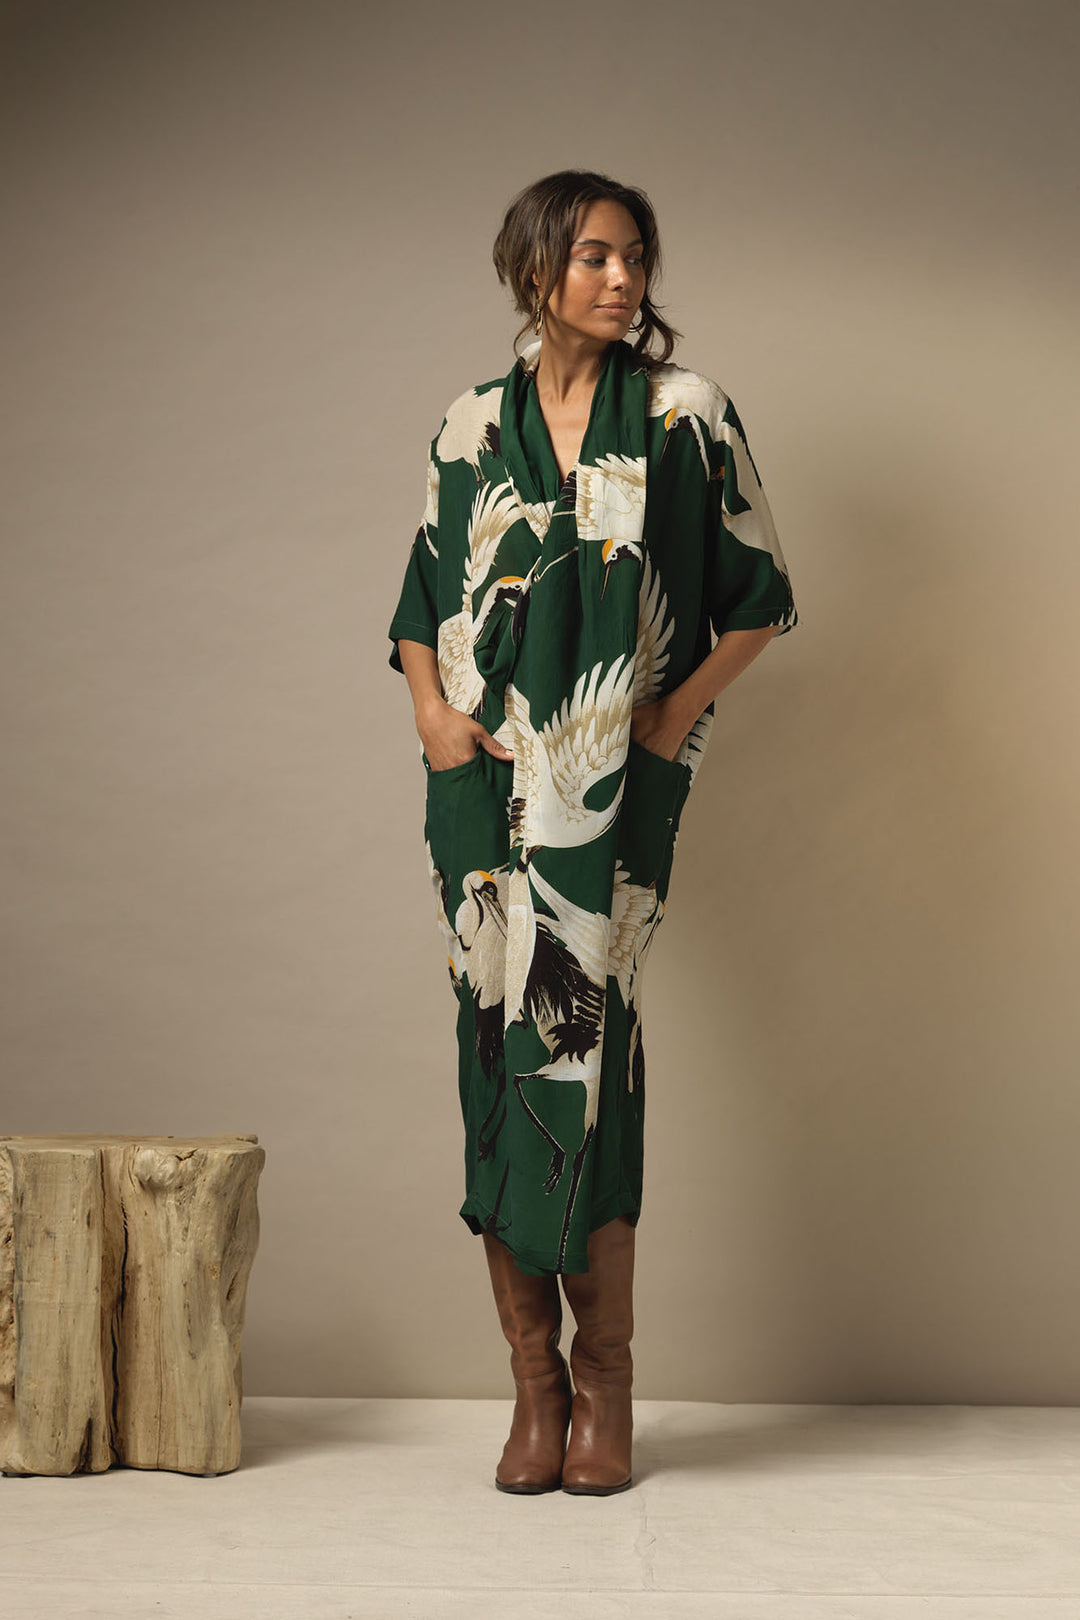 ladies pockets cowl neck Party Pockets midi dress green background with stork bird print by One Hundred Stars